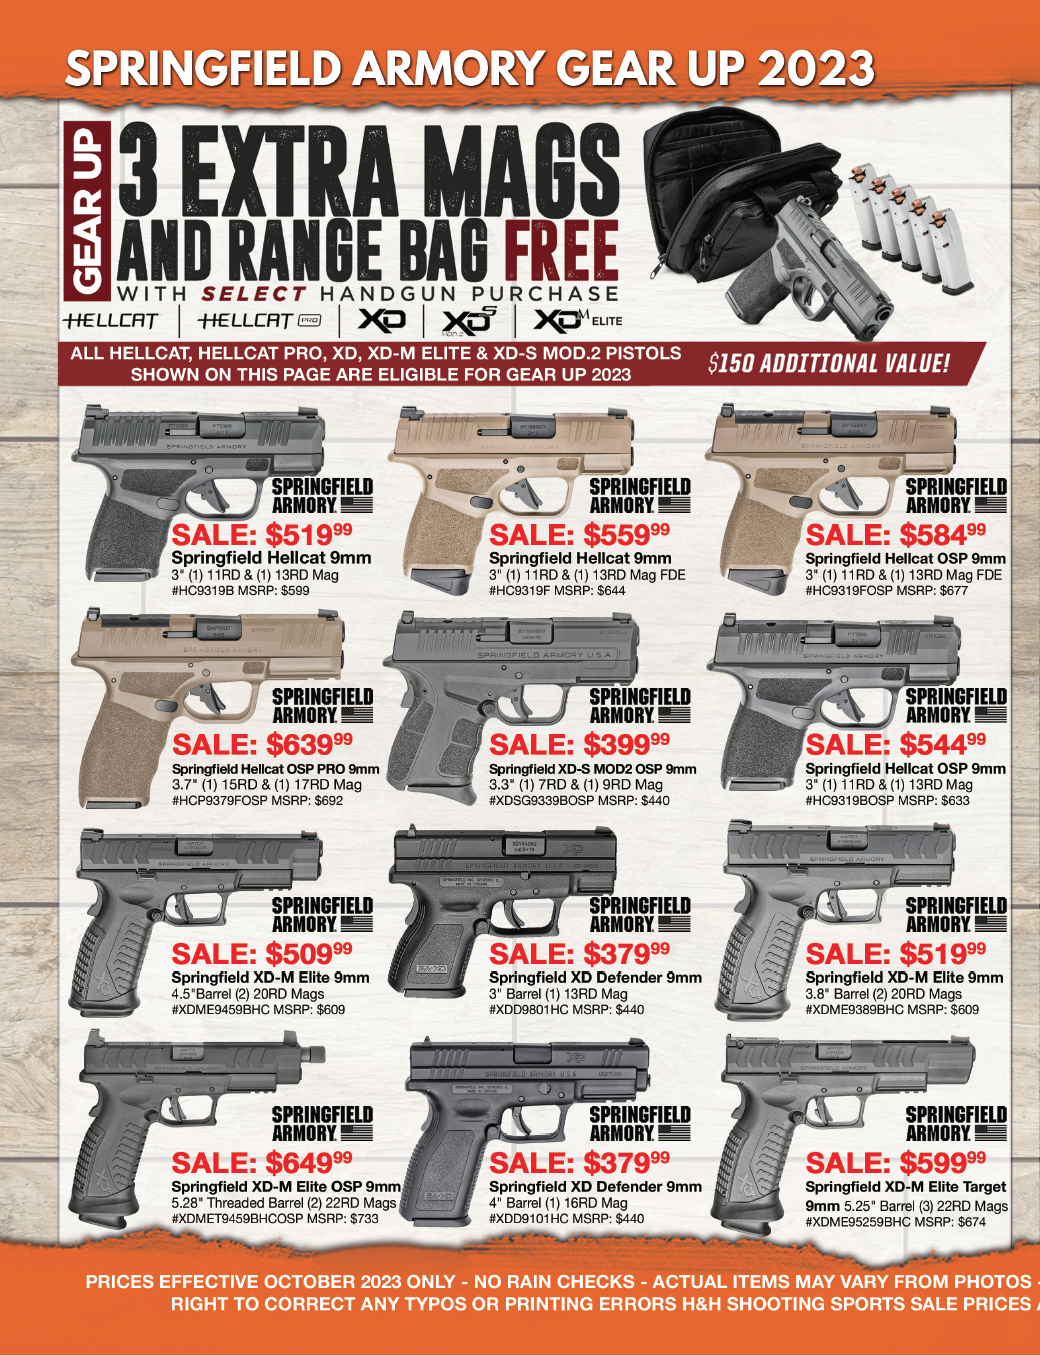 Retail sales flyer for H&H Shooting Sports in Oklahoma City, valid from October 1st 2023 to October 31st 2023